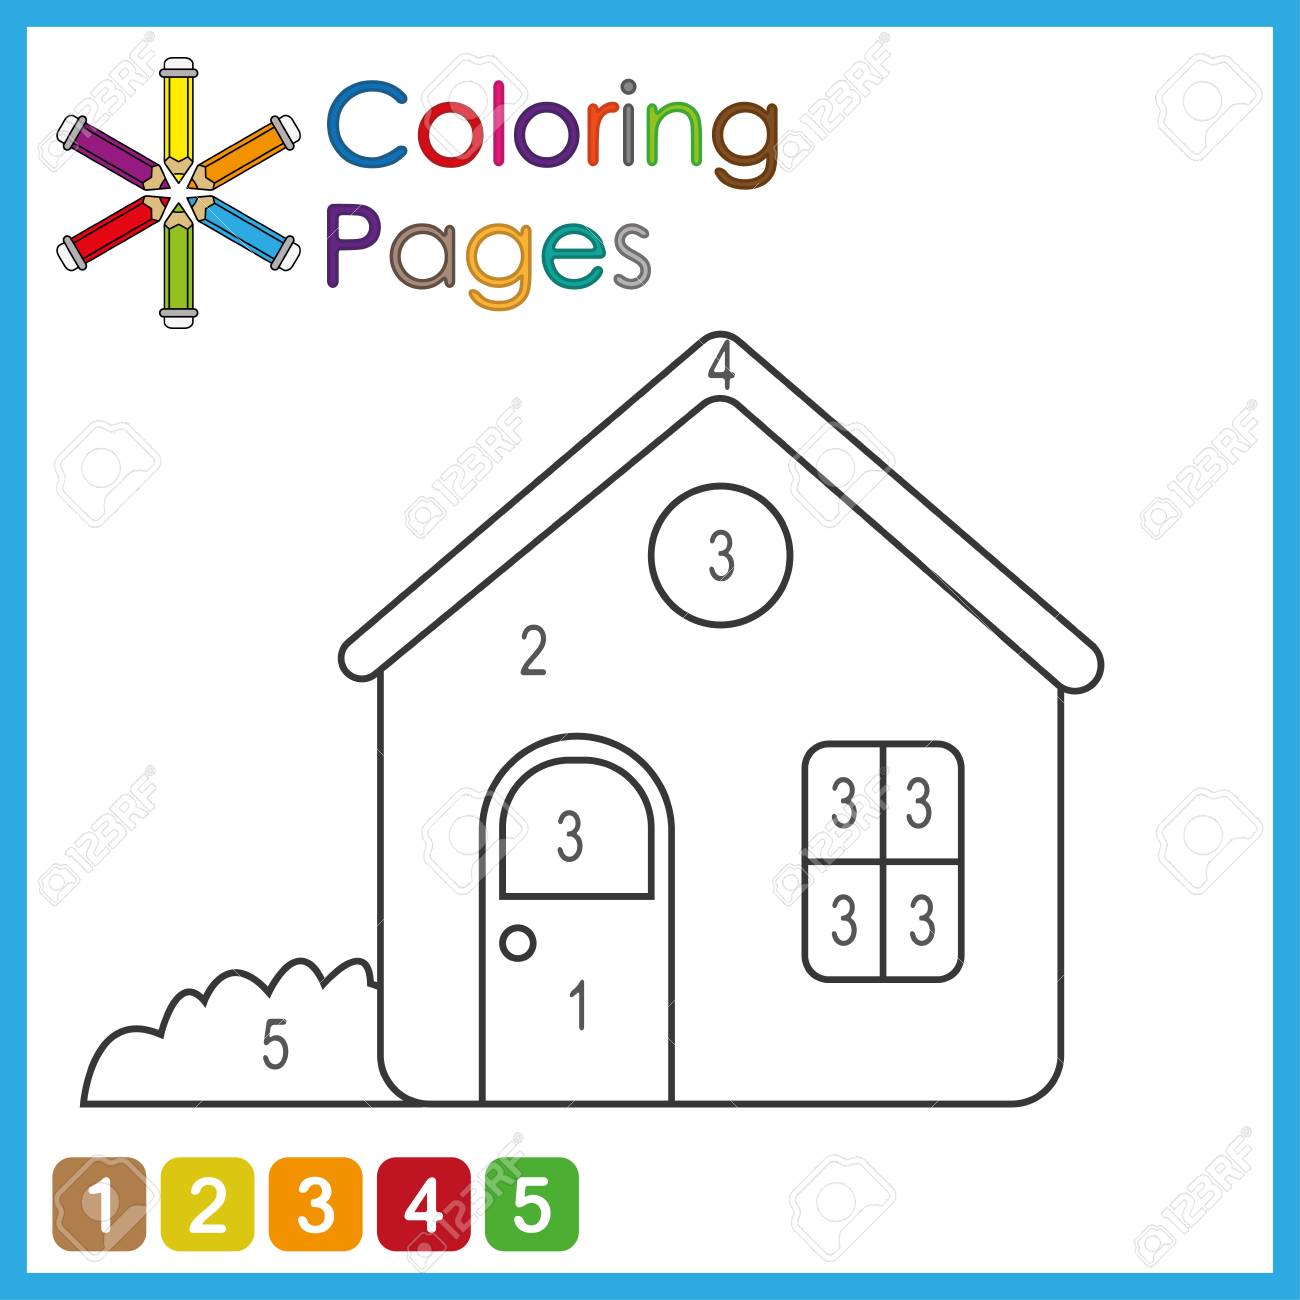 Coloring page for kids color the parts of the object according to numbers color by numbers activity pages royalty free svg cliparts vectors and stock illustration image